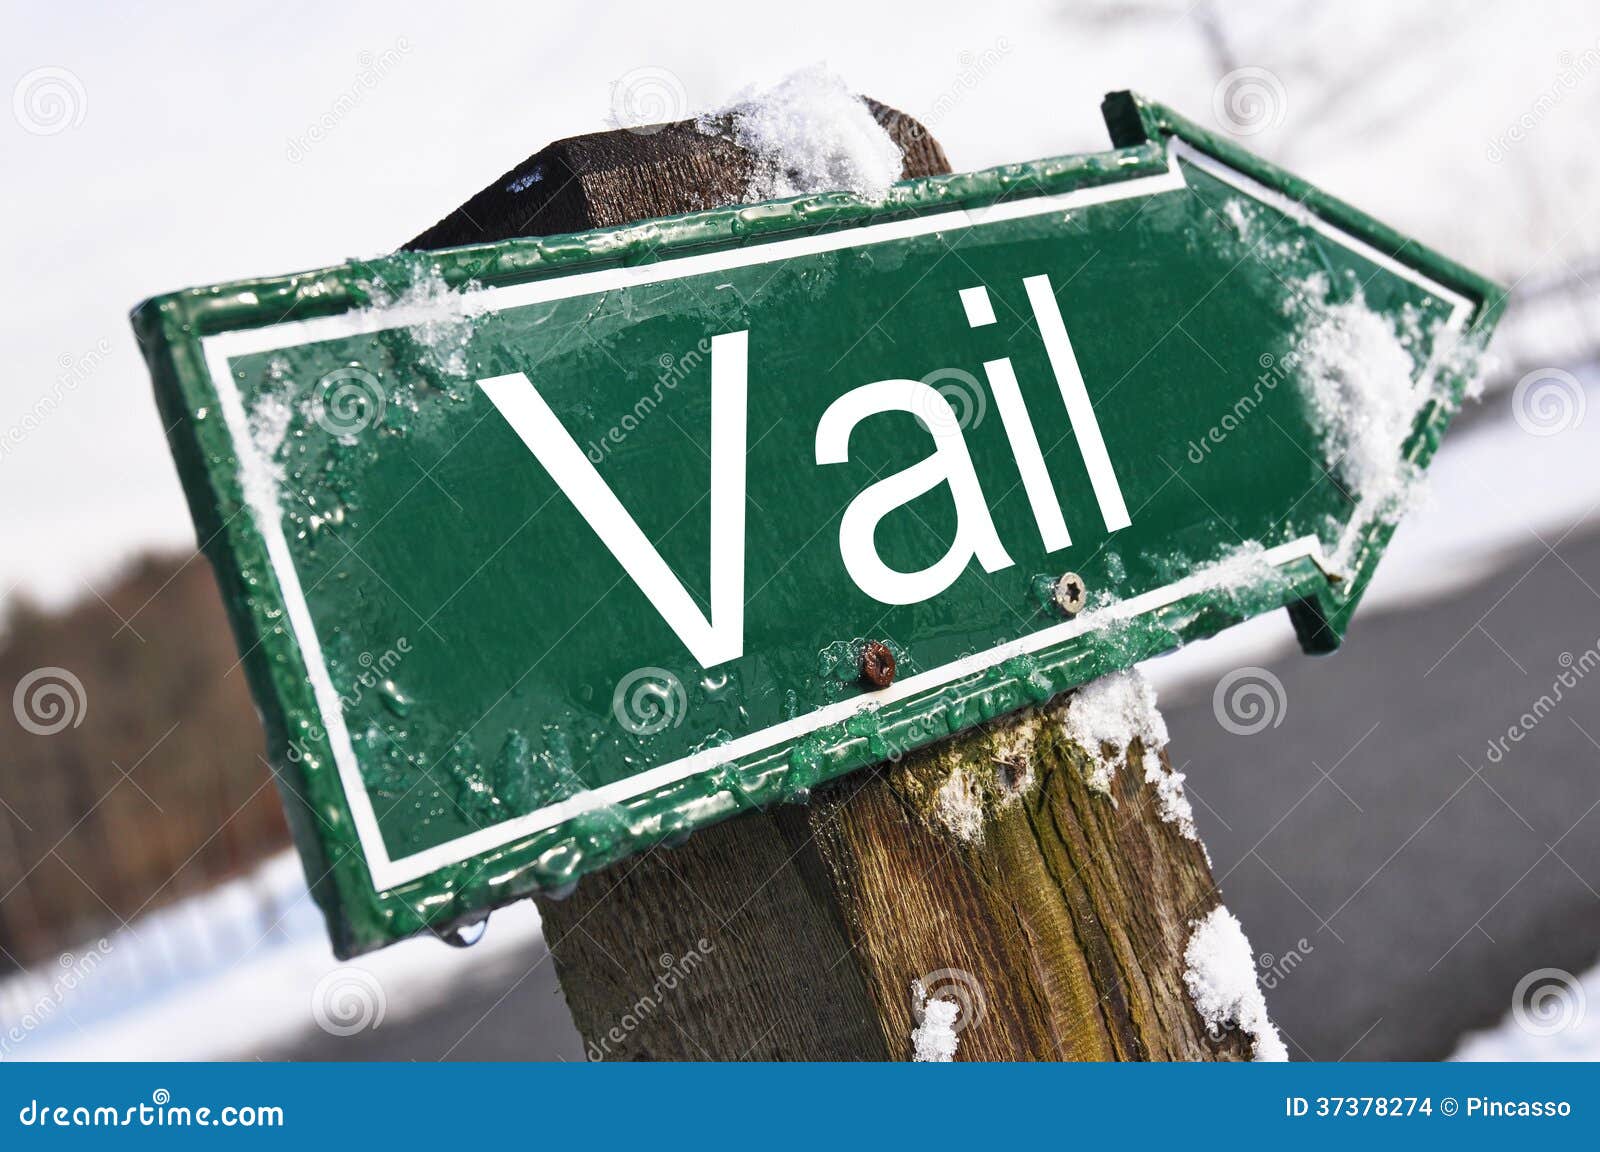 vail road sign